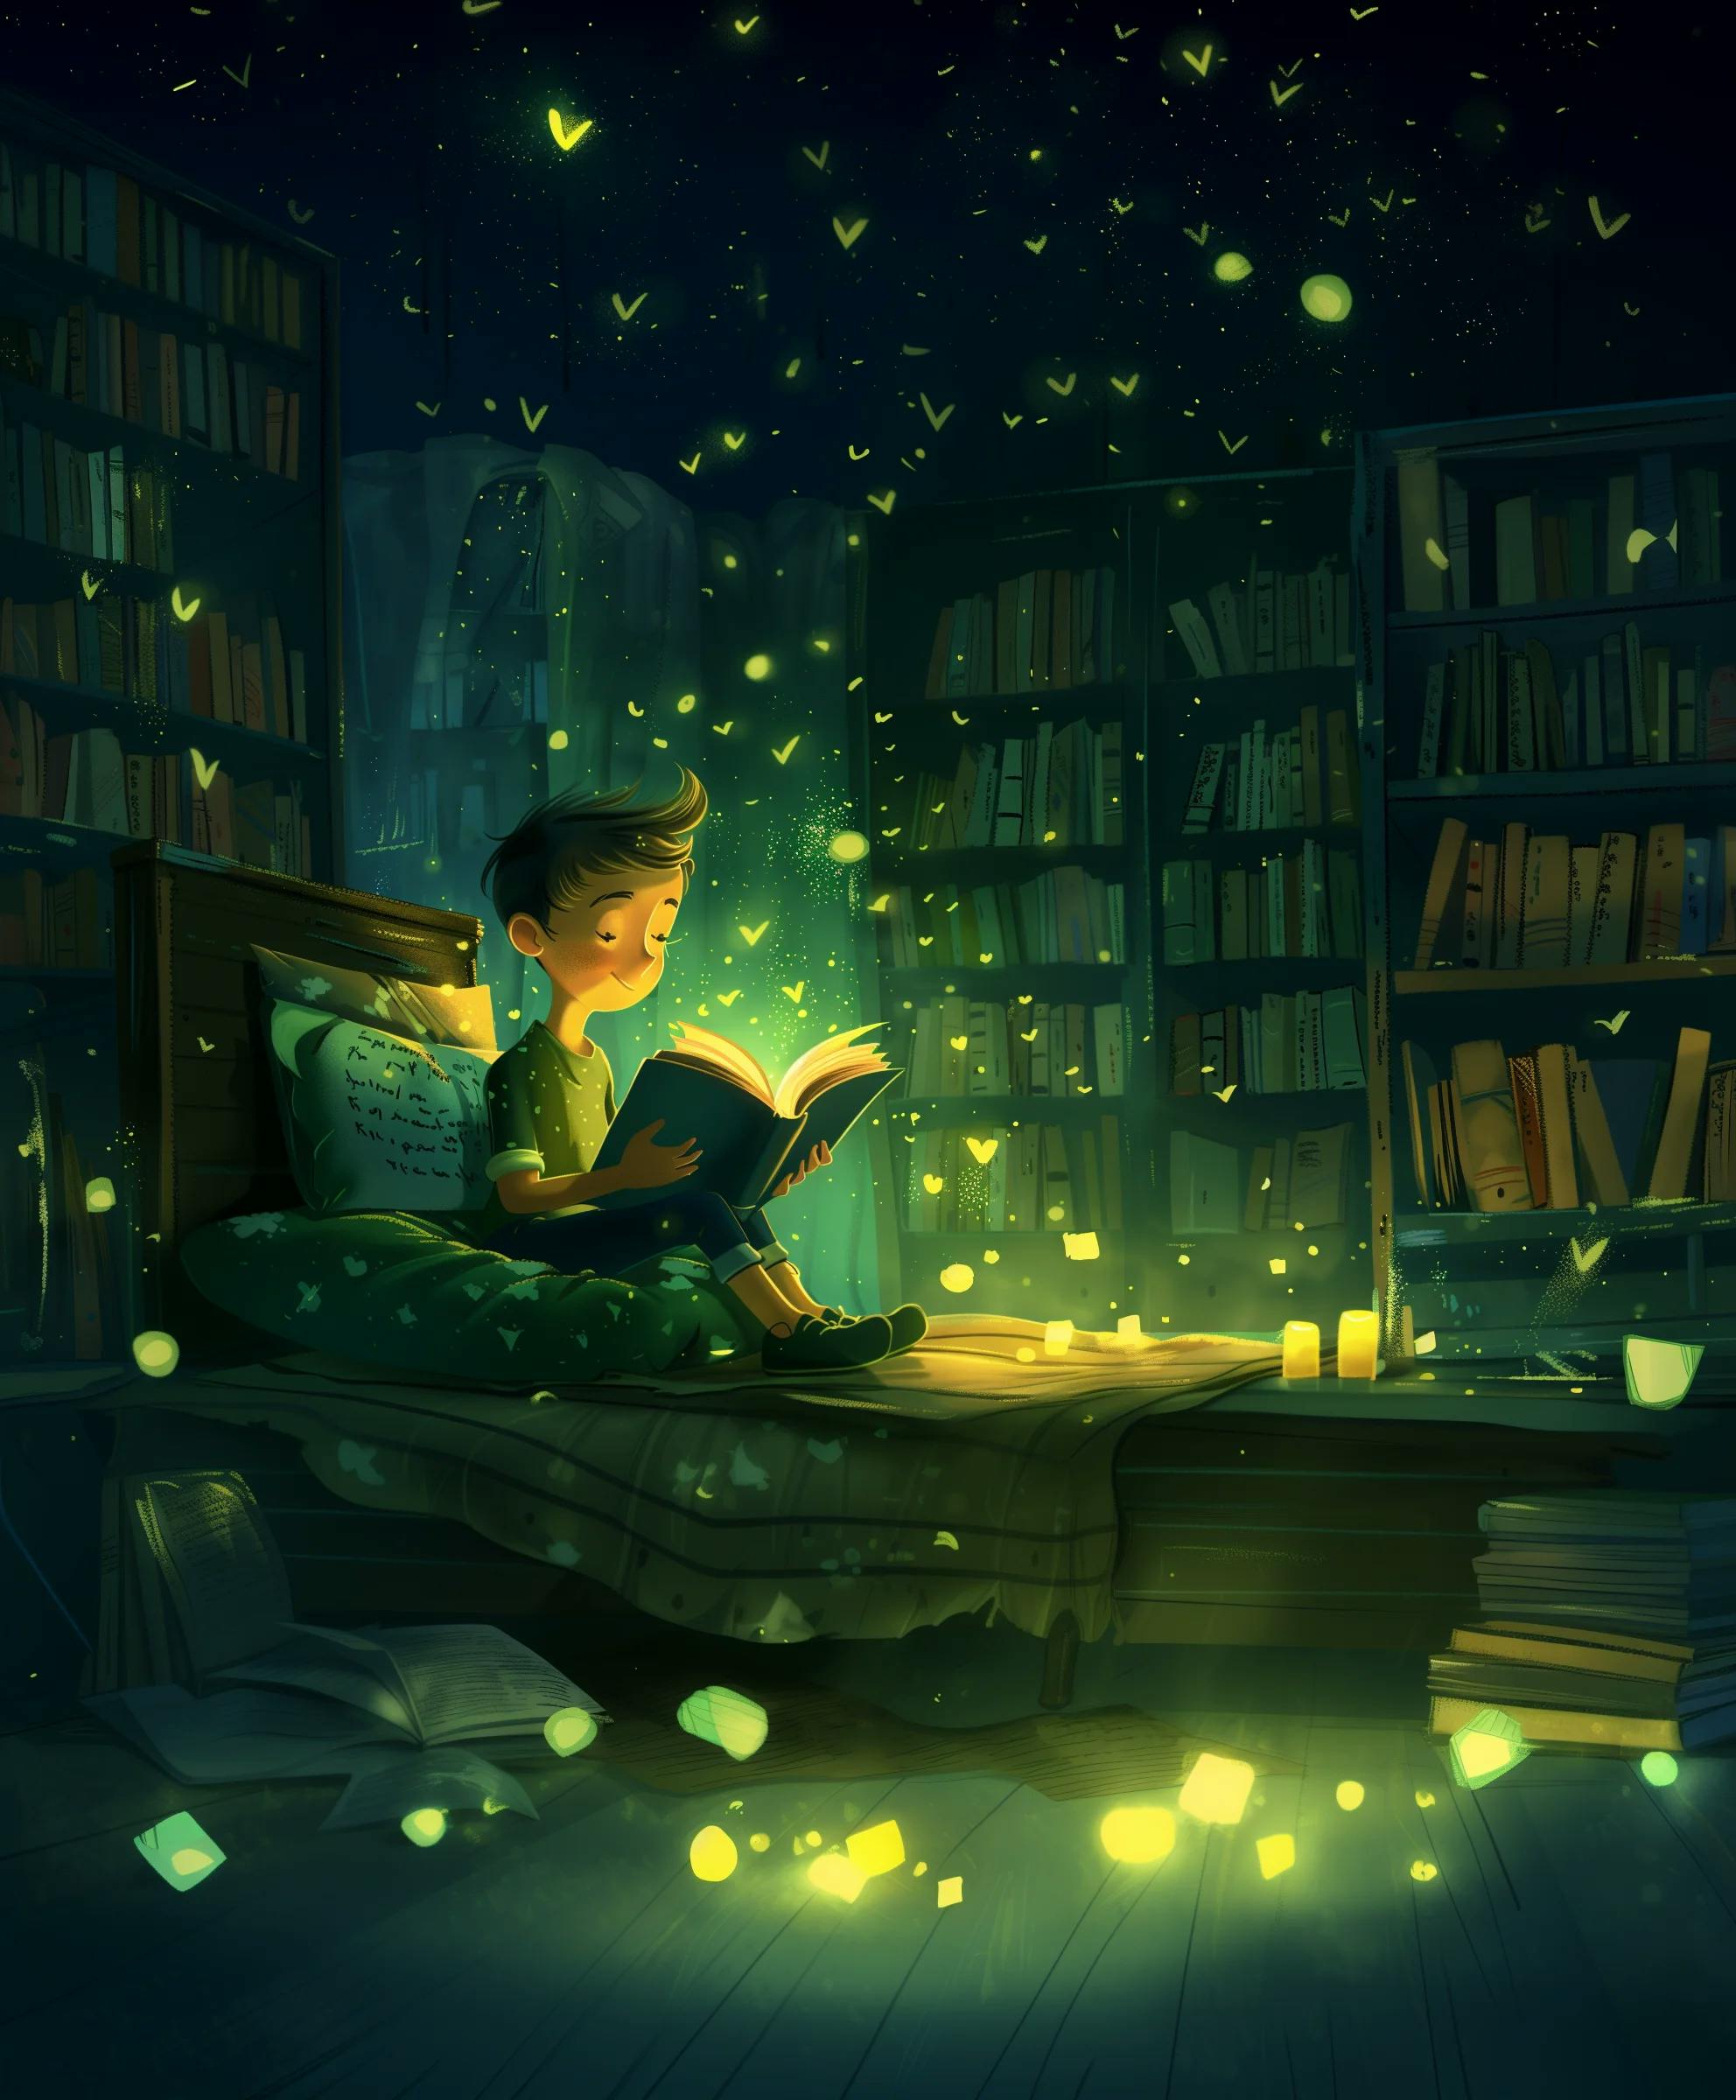 The Magic of Bedtime Stories: More Than Just a Goodnight Tale